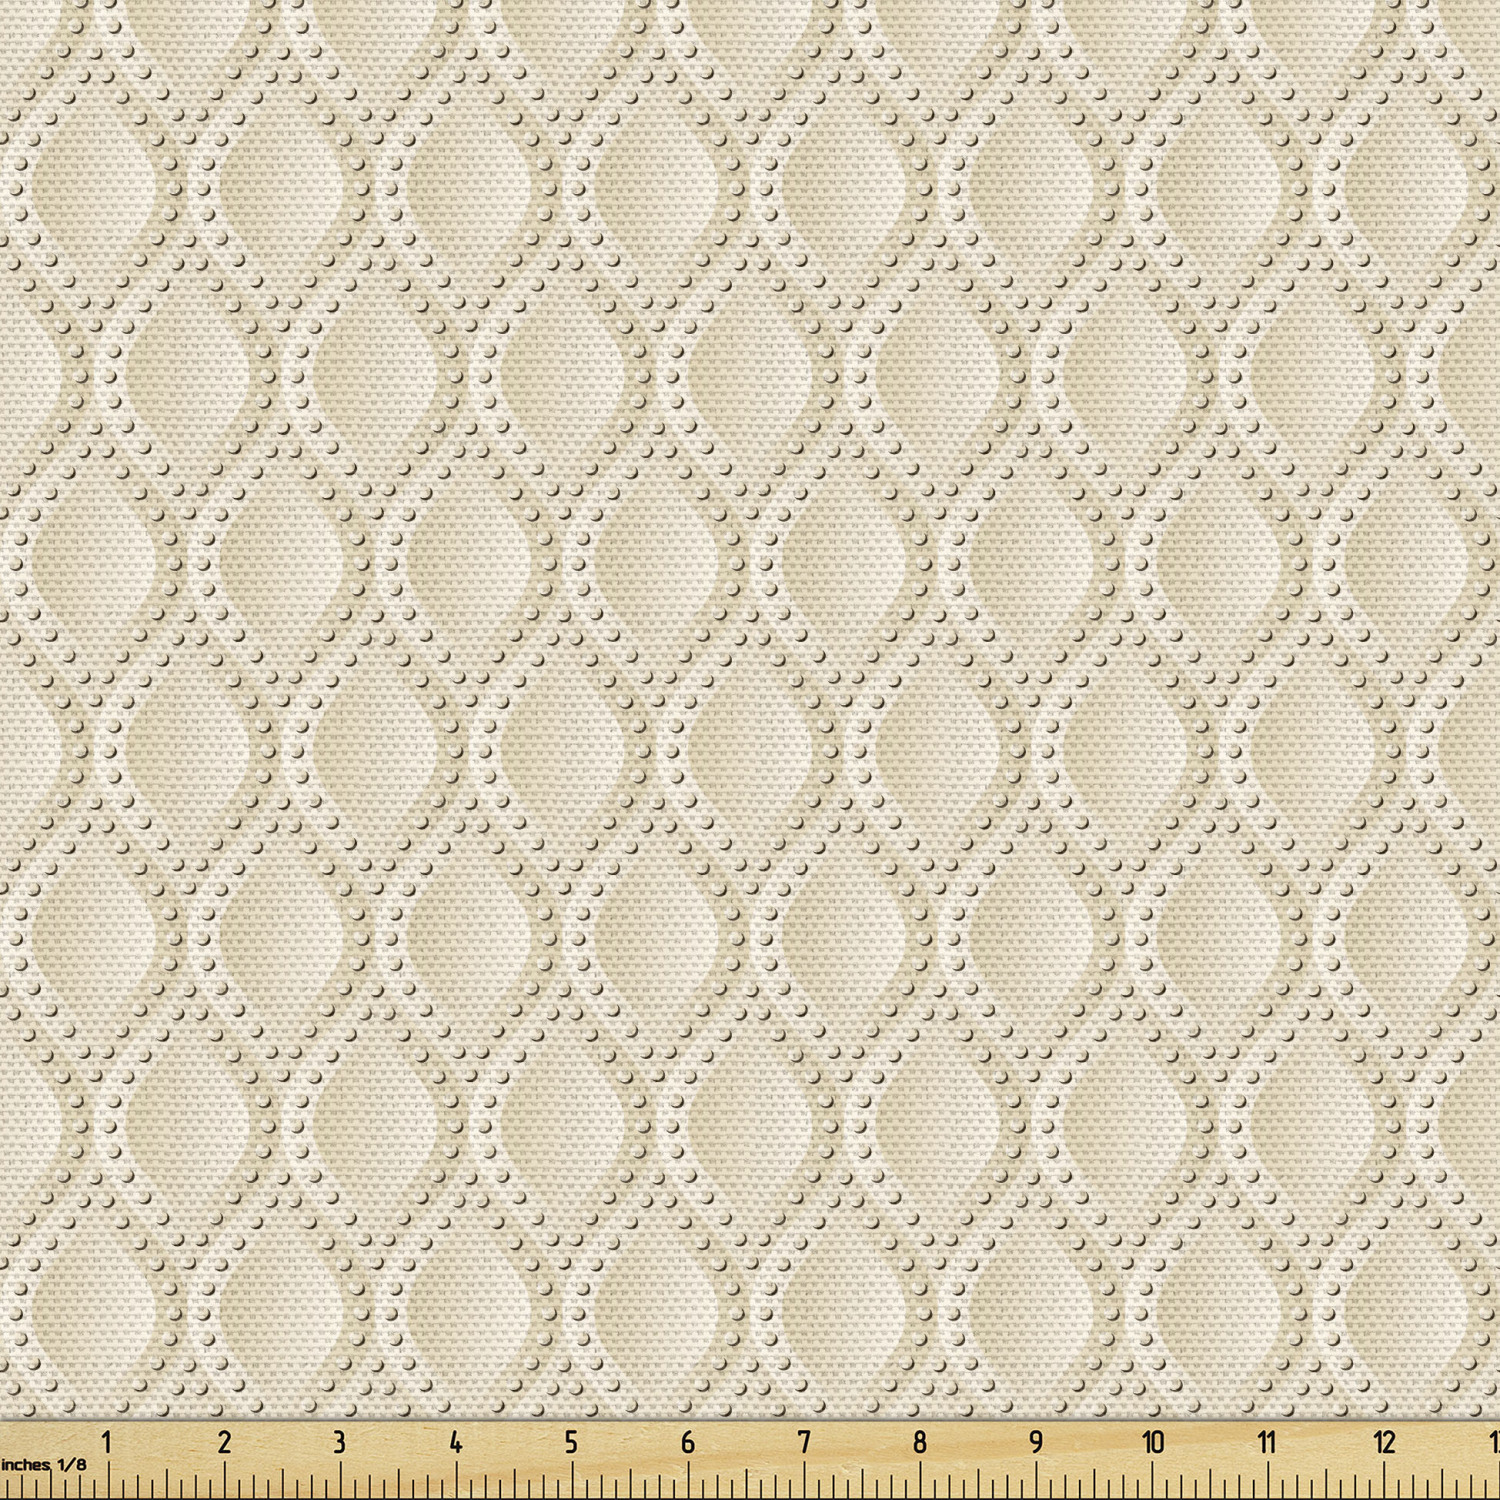 Neutral Color Fabric by the Yard, Classic Composition of Droplet Like  Elements Dotted Round Motifs, Decorative Upholstery Fabric for Chairs &  Home